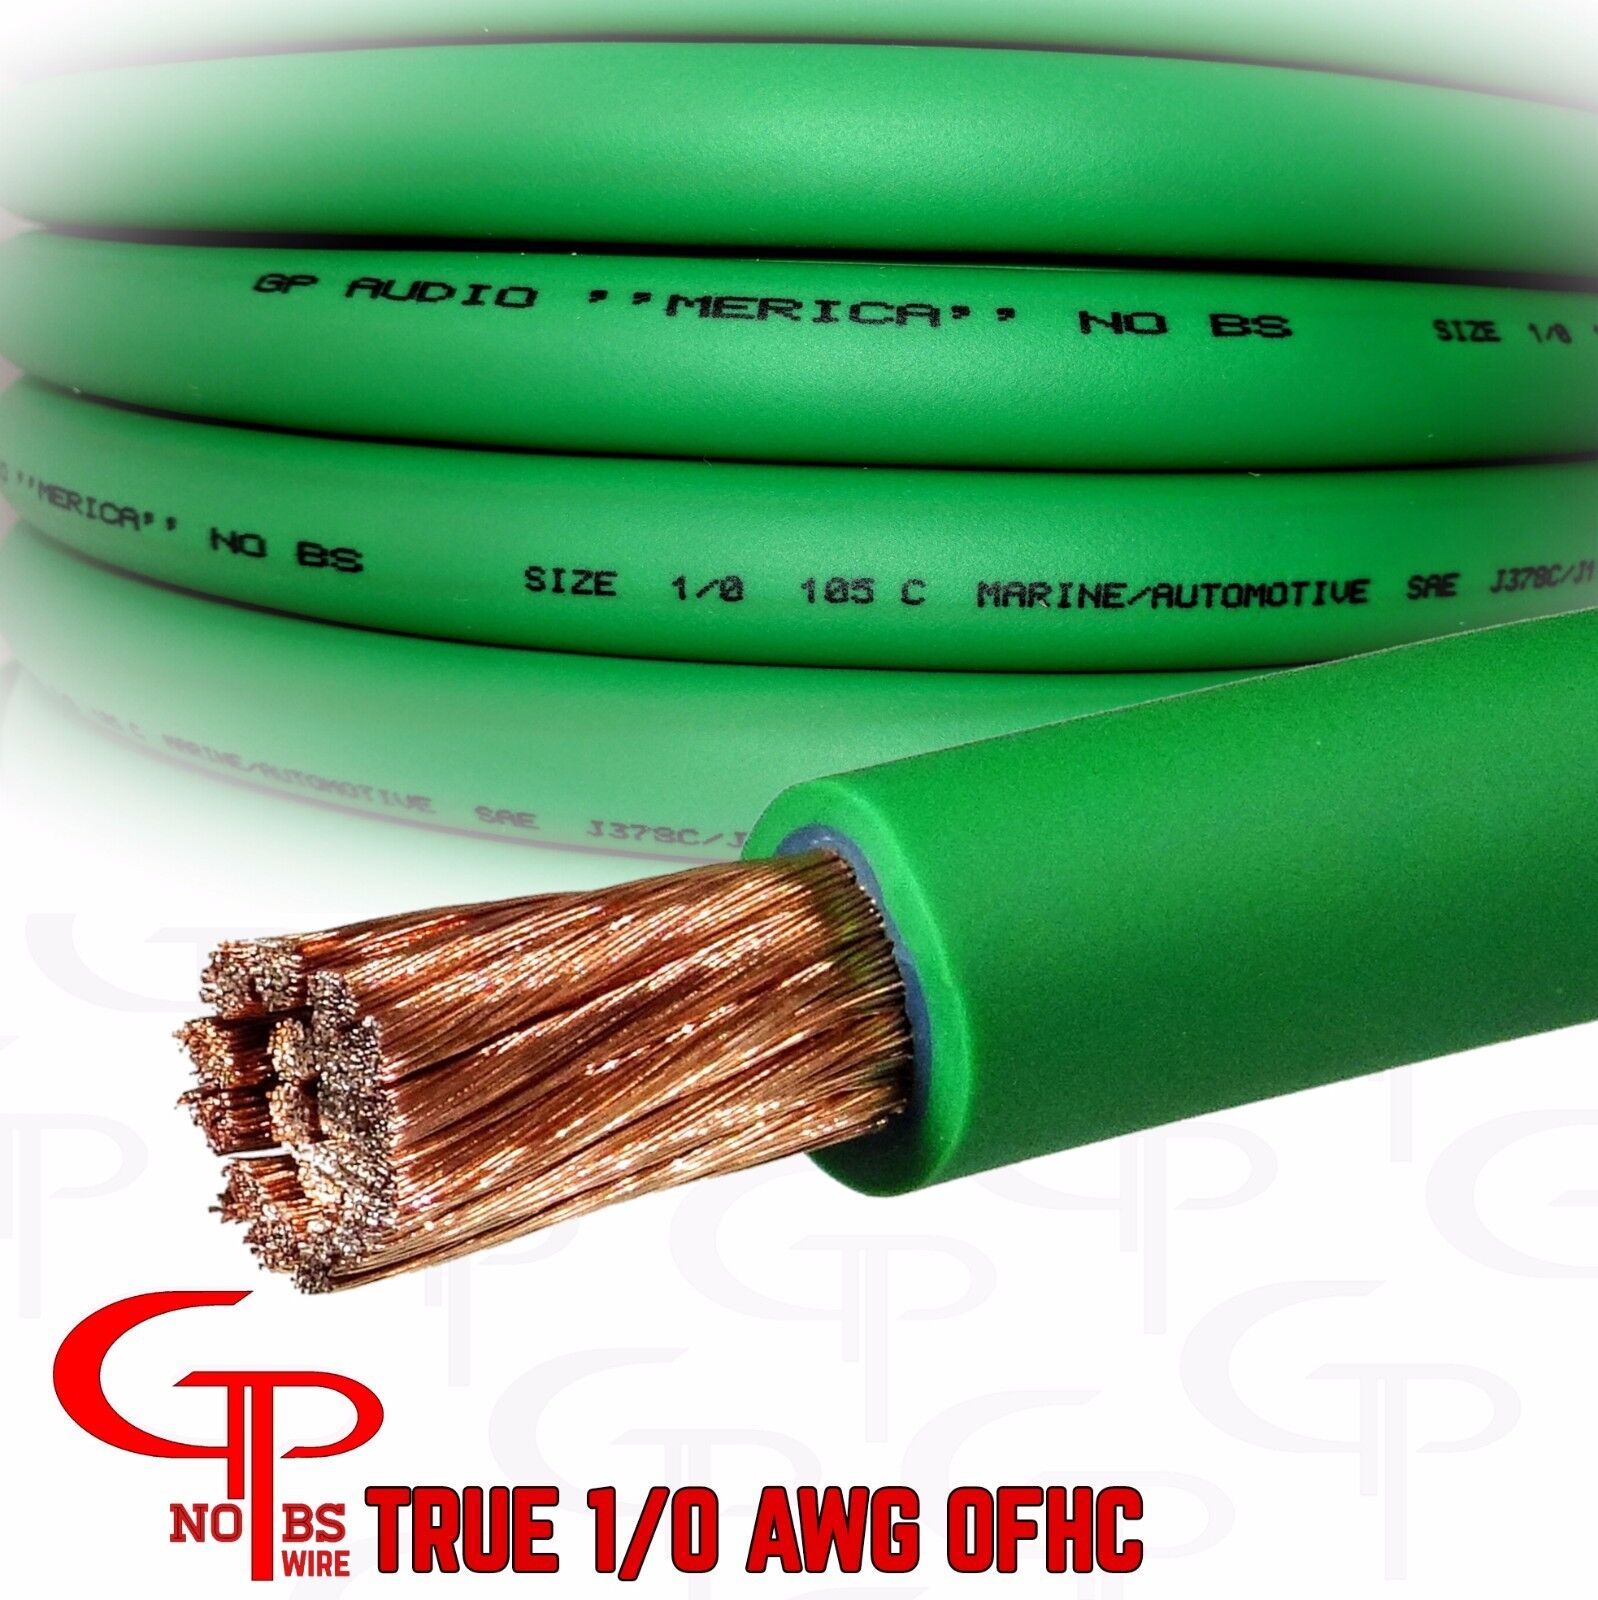 50 ft TRUE AWG 1/0 Gauge OFC COPPER Power Wire GREEN Ground Cable GP Car Audio 